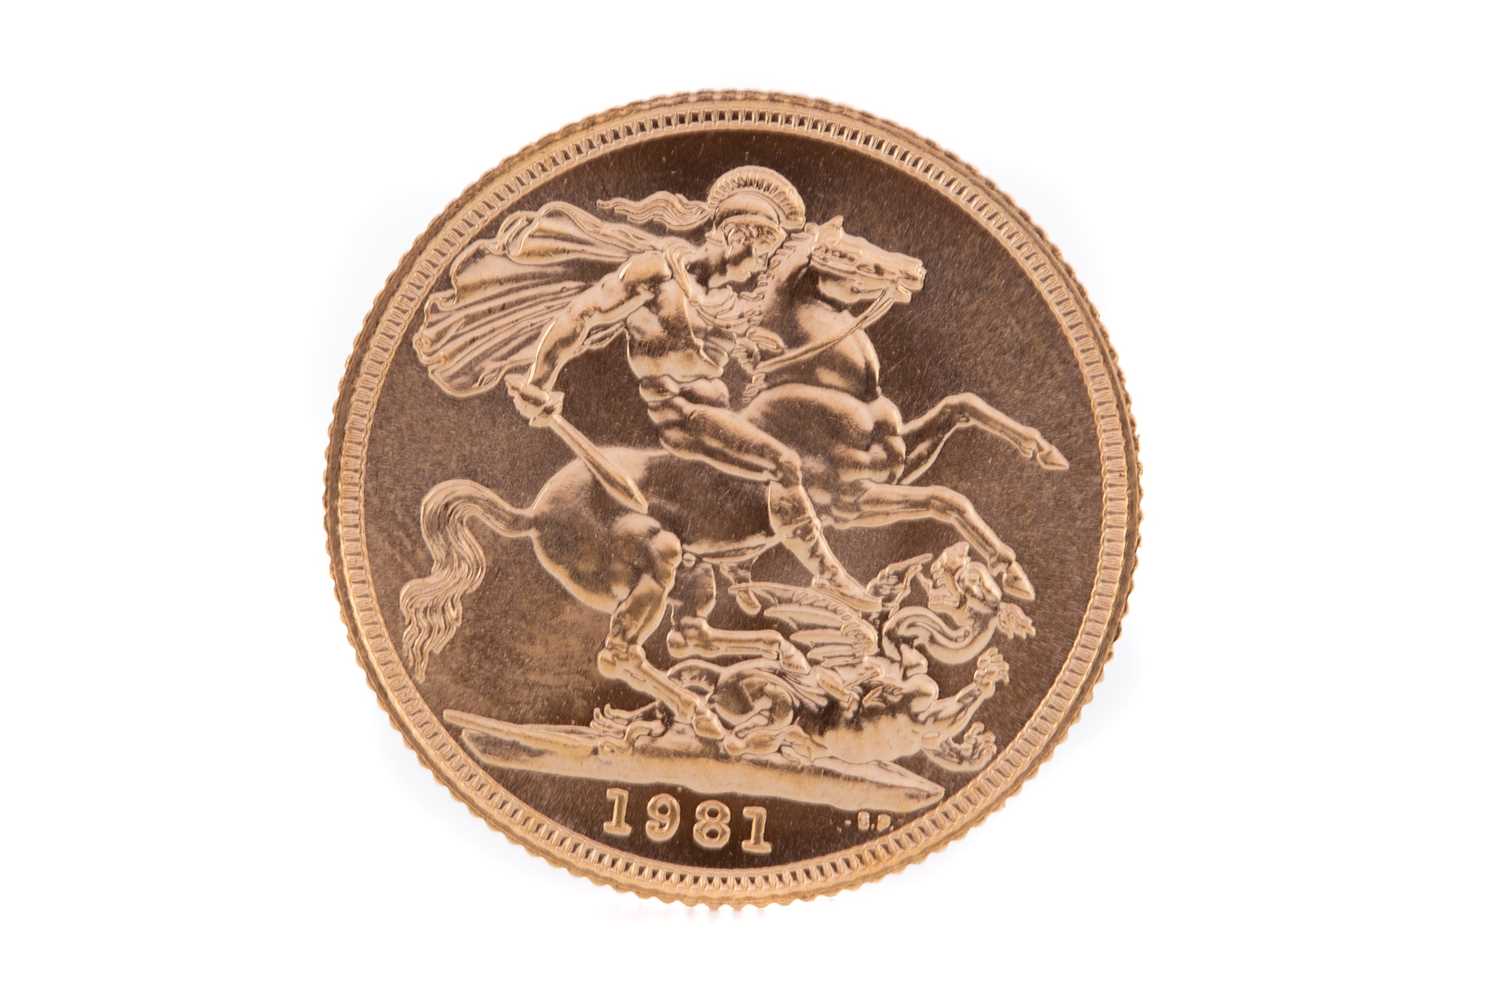 Lot 101 - AN ELIZABETH II GOLD SOVEREIGN DATED 1981